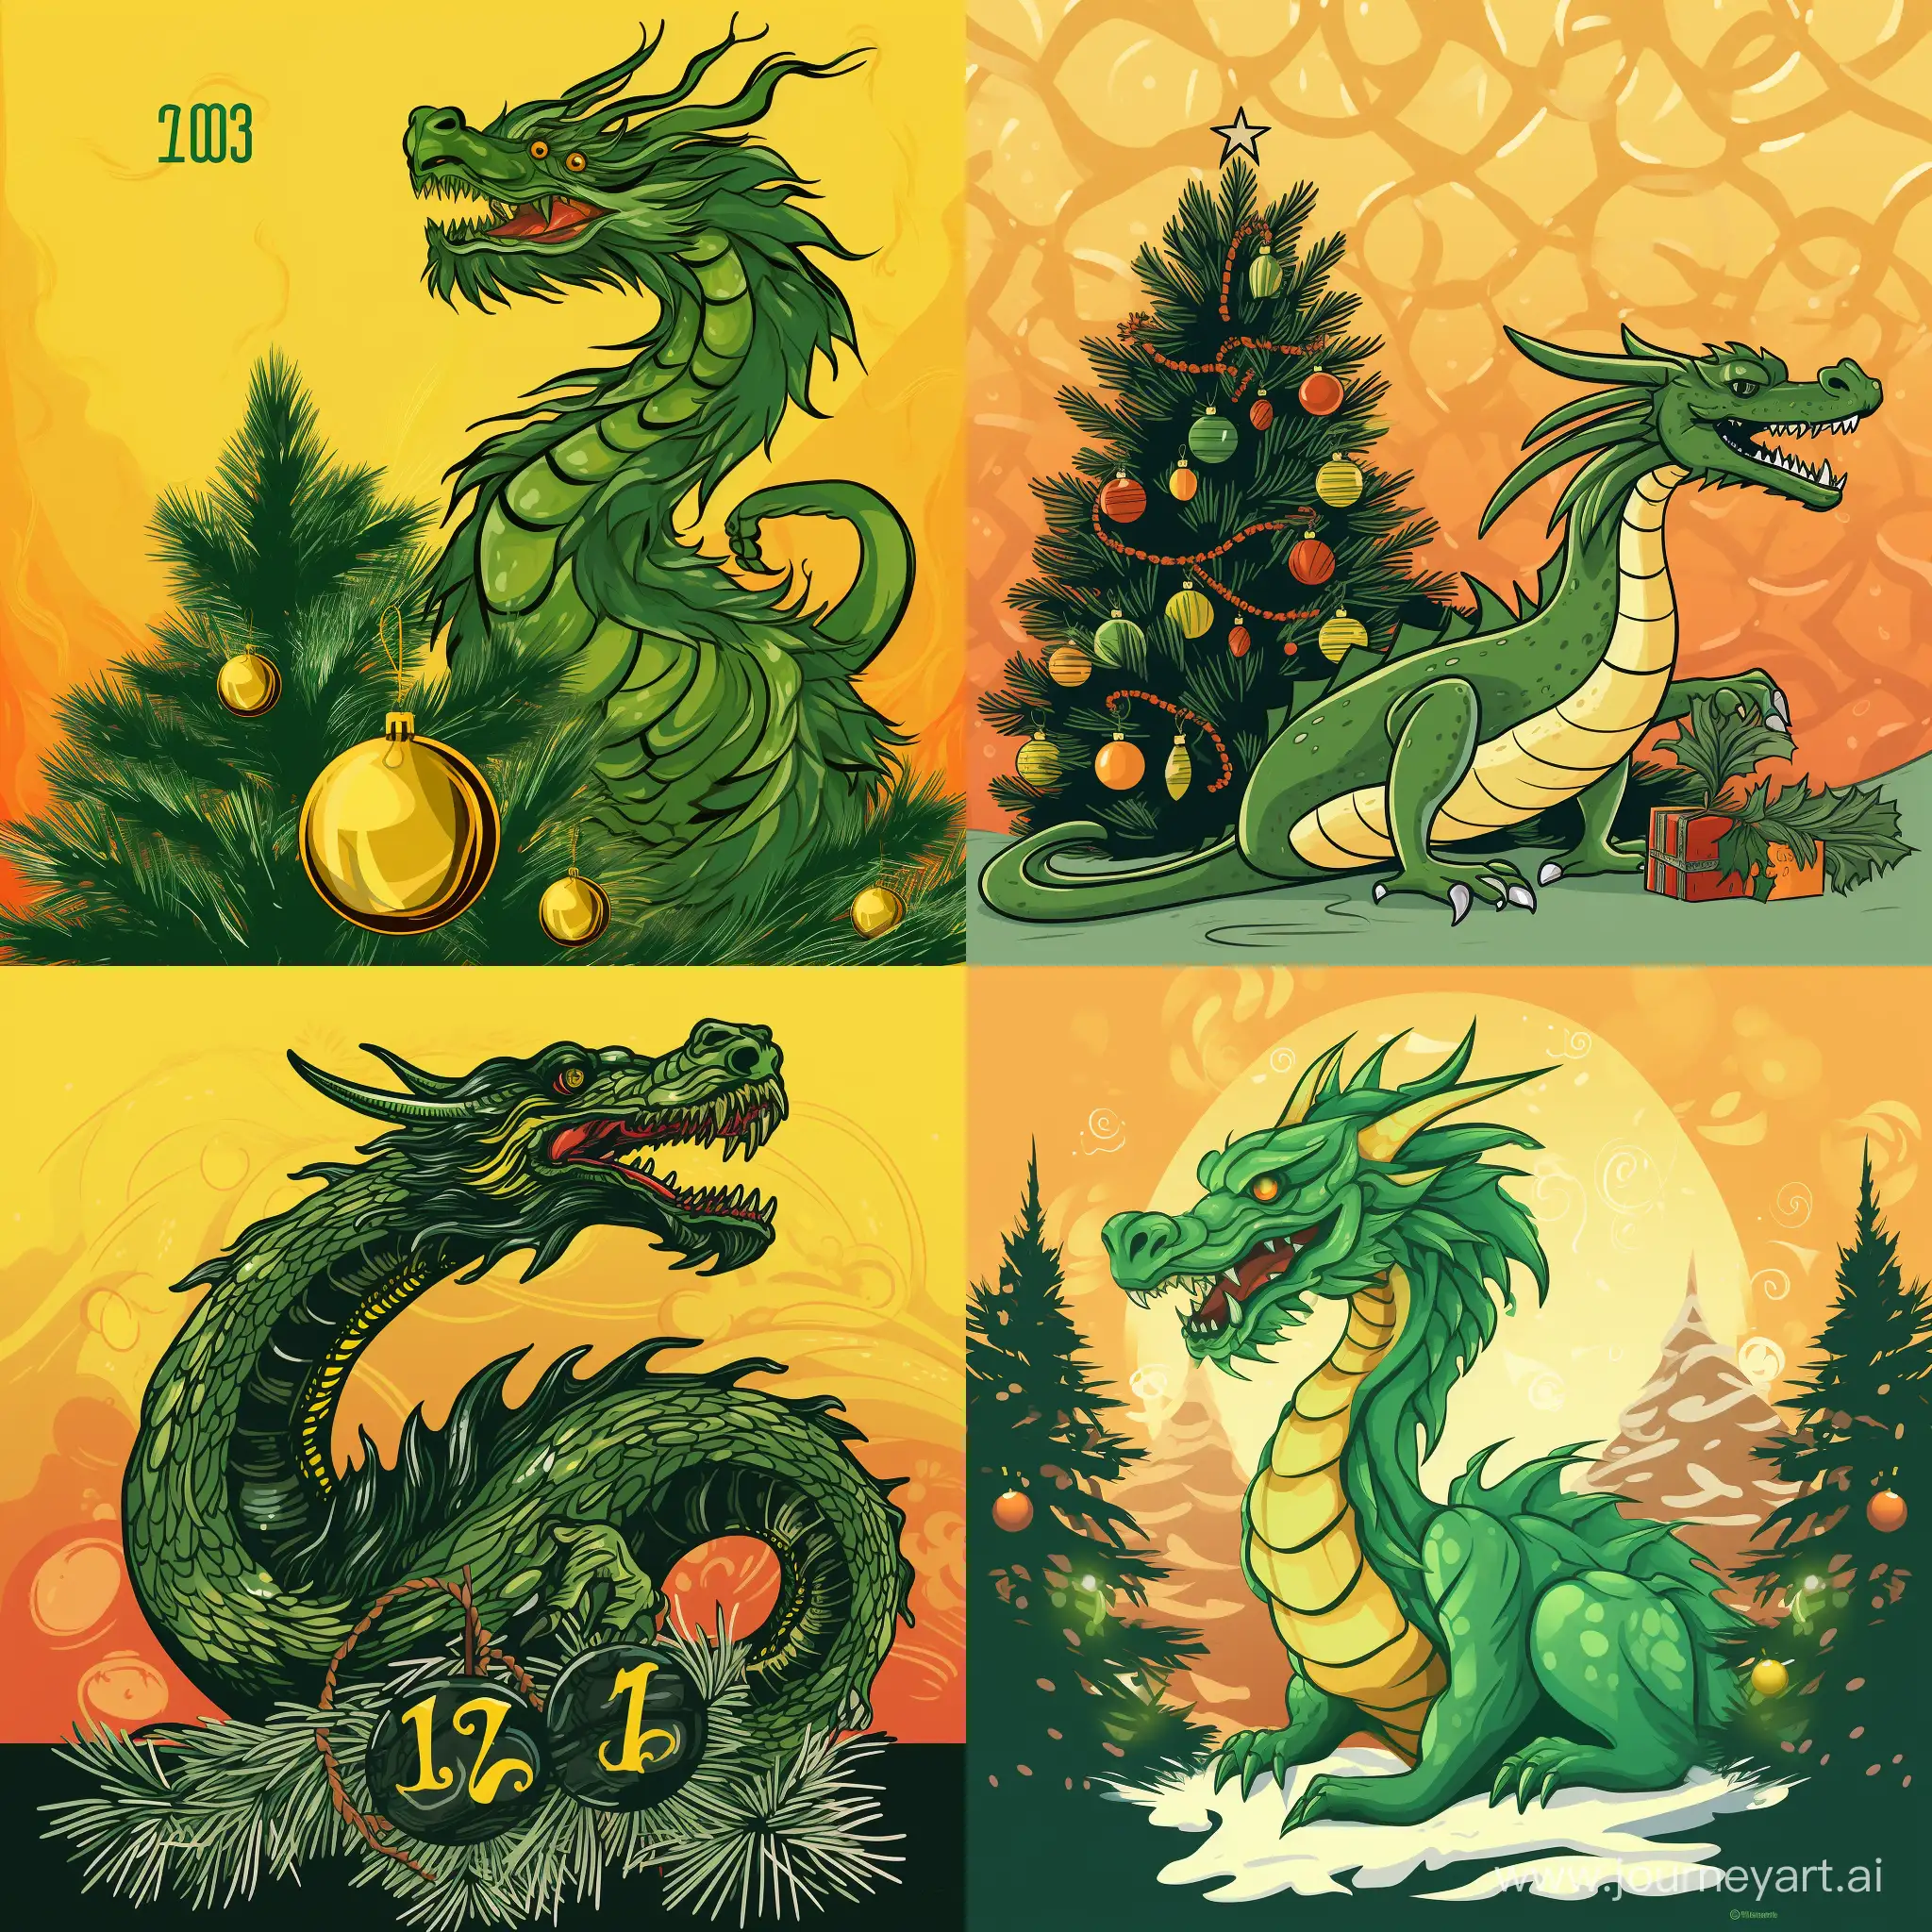 Enchanting-Green-Dragon-Amidst-New-Years-Decorations